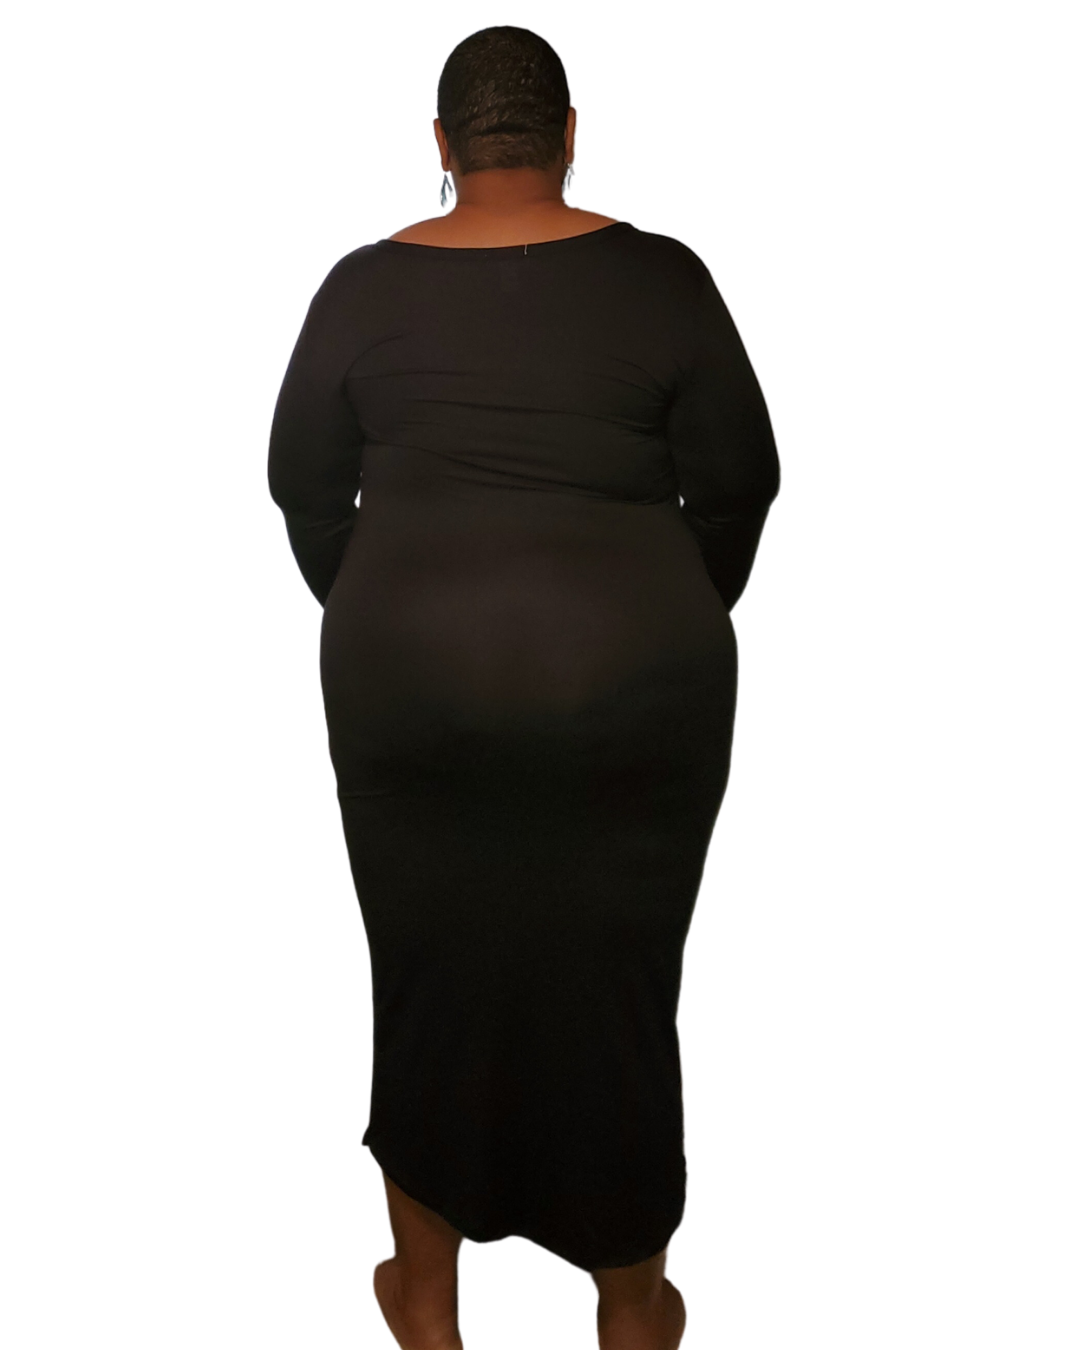 1x-3x black soft material v-neck fitted dress. dress goes pass the knees